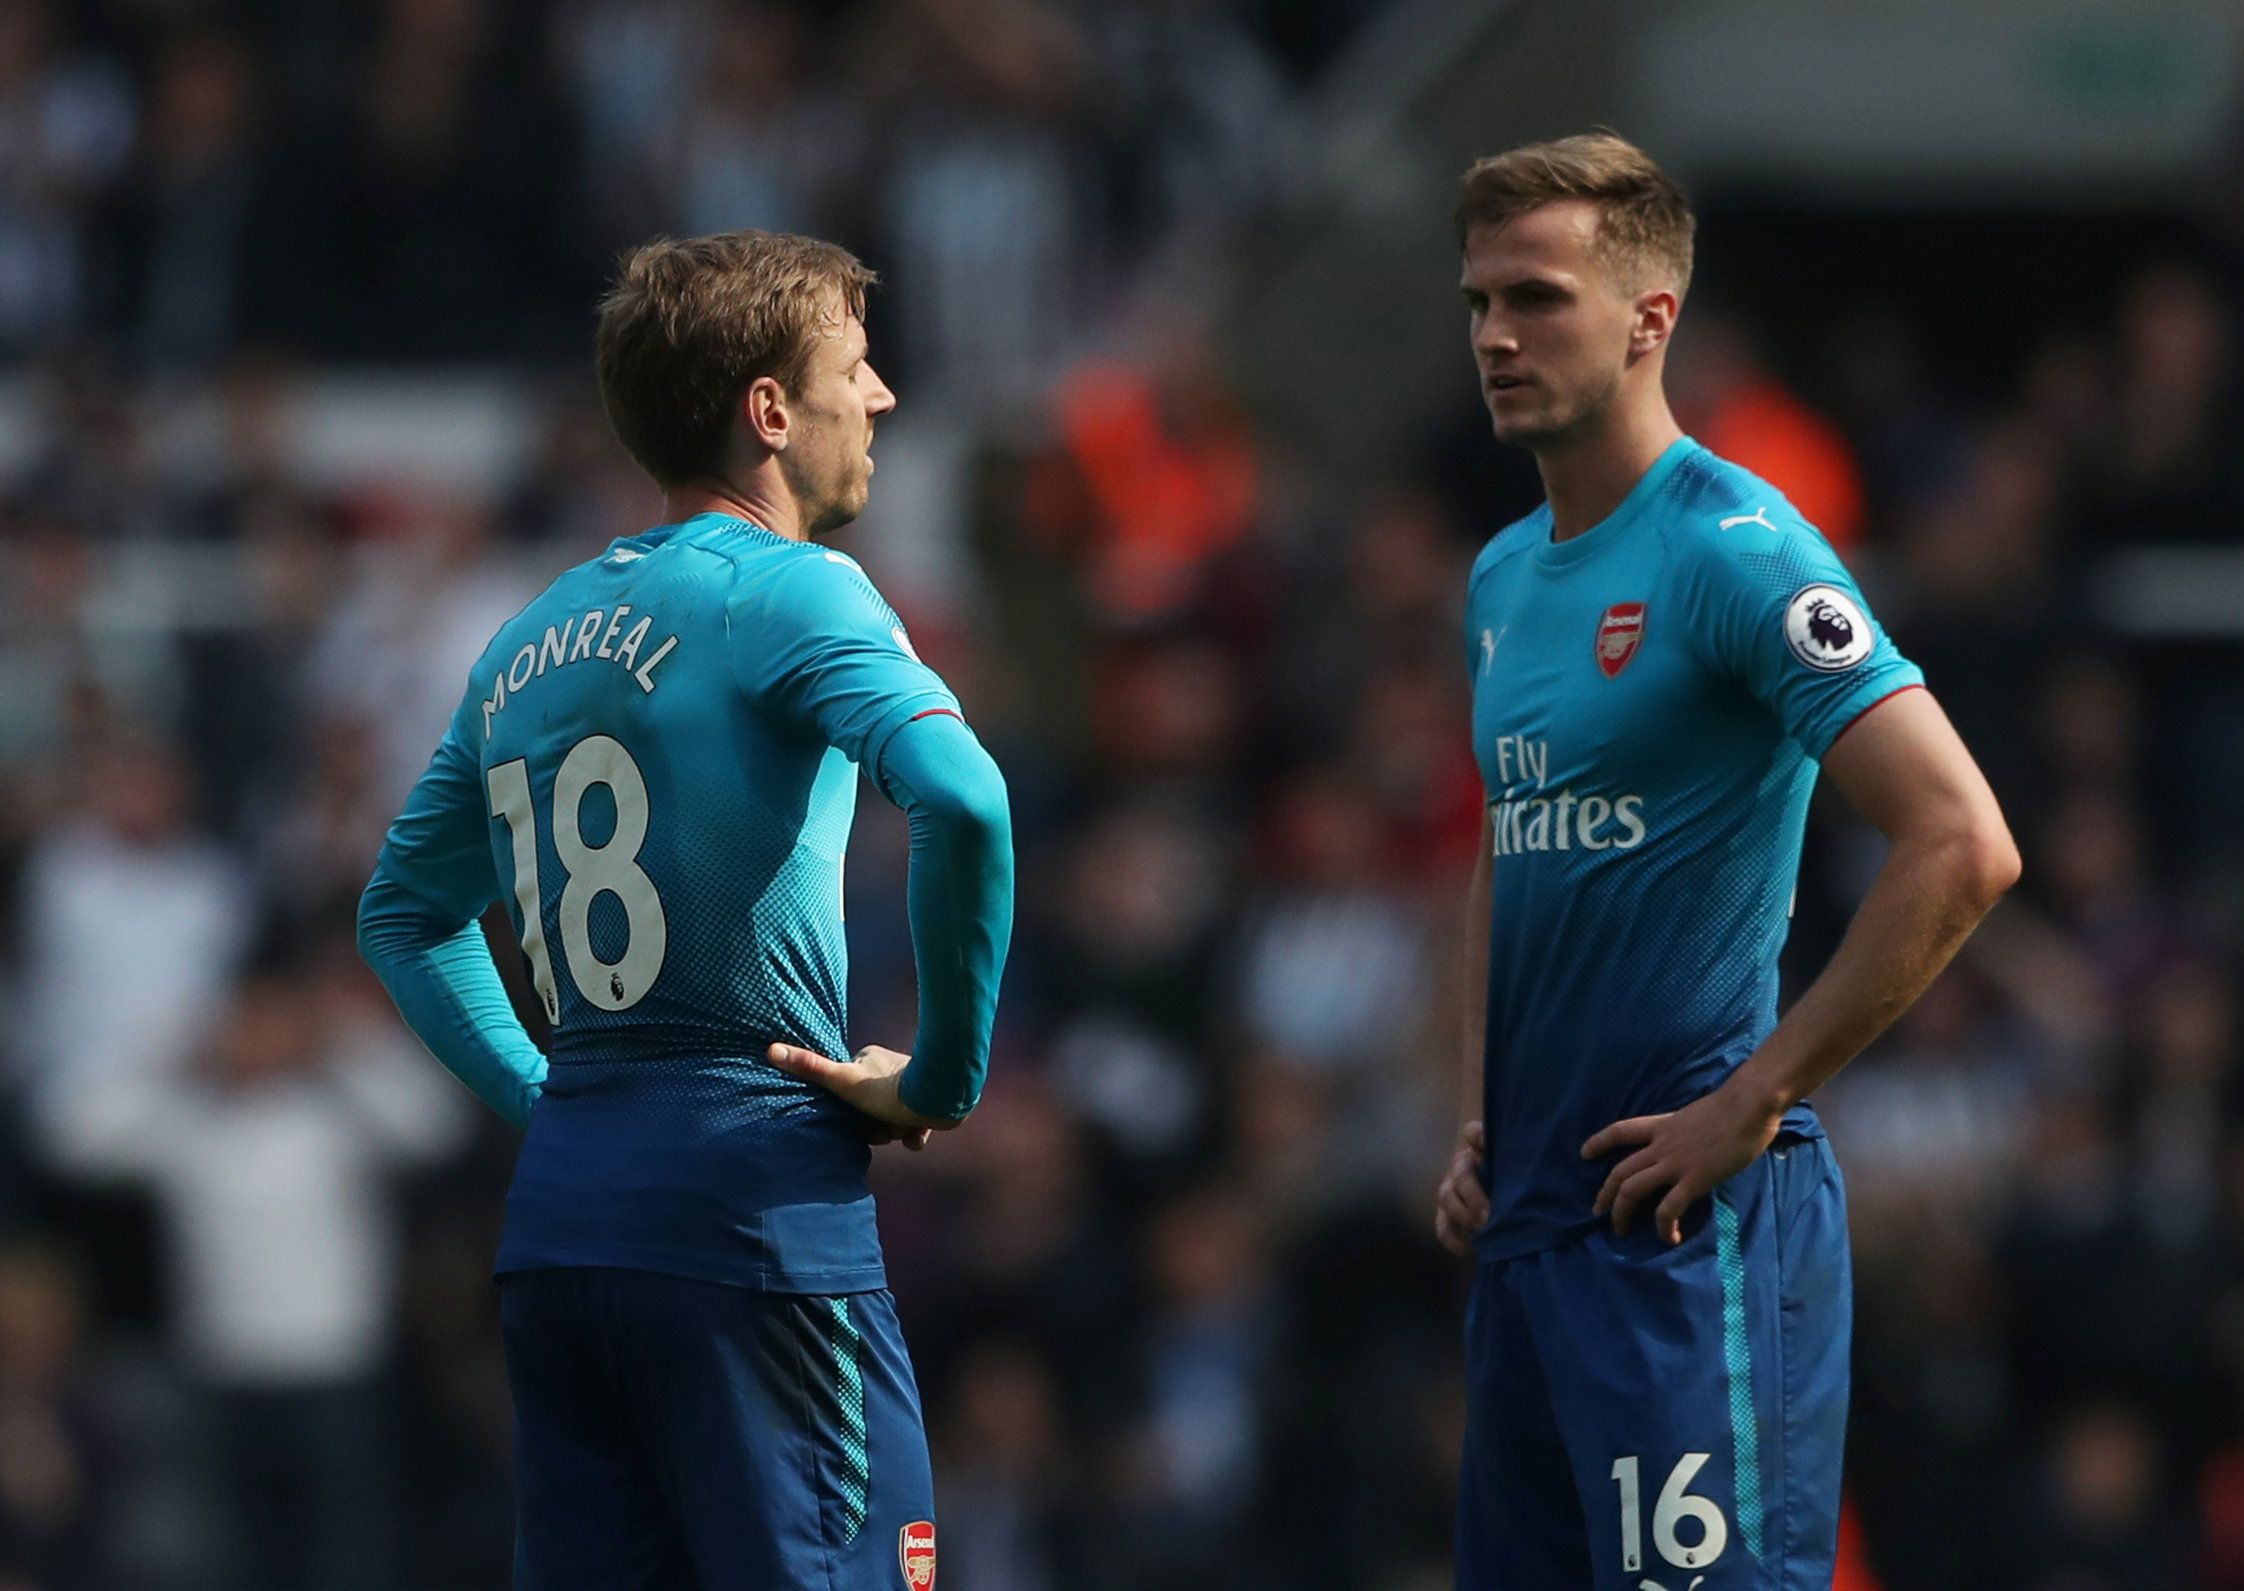 Soccer Football - Premier League - Newcastle United vs Arsenal - St James' Park, Newcastle, Britain - April 15, 2018   Arsenal's Nacho Monreal and Rob Holding looks dejected after the match            REUTERS/Scott Heppell    EDITORIAL USE ONLY. No use with unauthorized audio, video, data, fixture lists, club/league logos or 